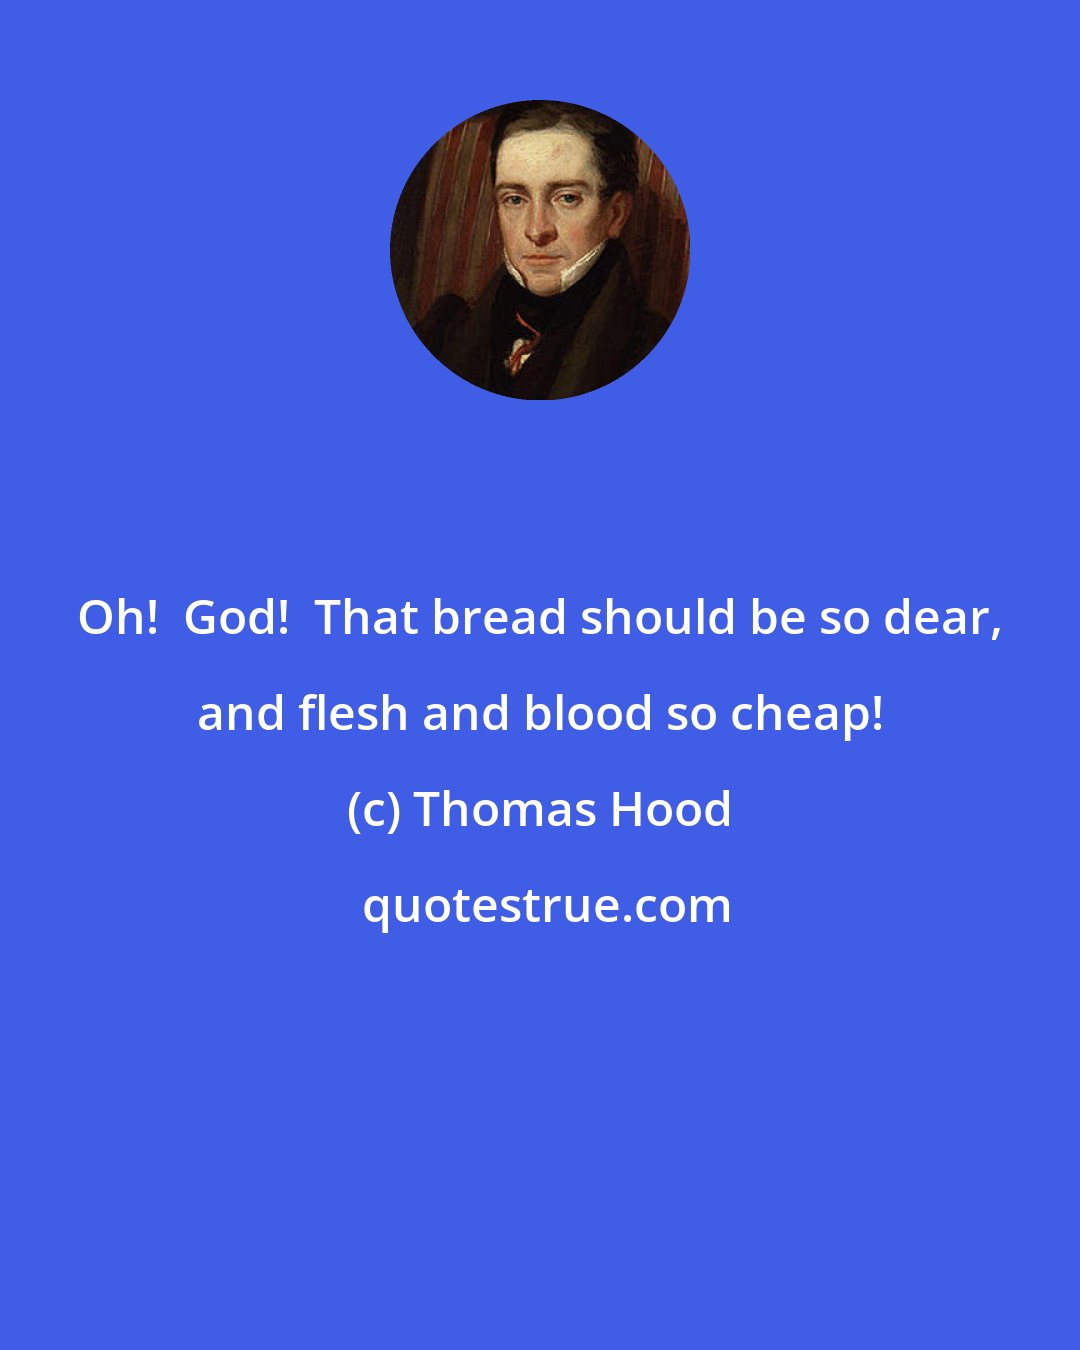 Thomas Hood: Oh!  God!  That bread should be so dear, and flesh and blood so cheap!